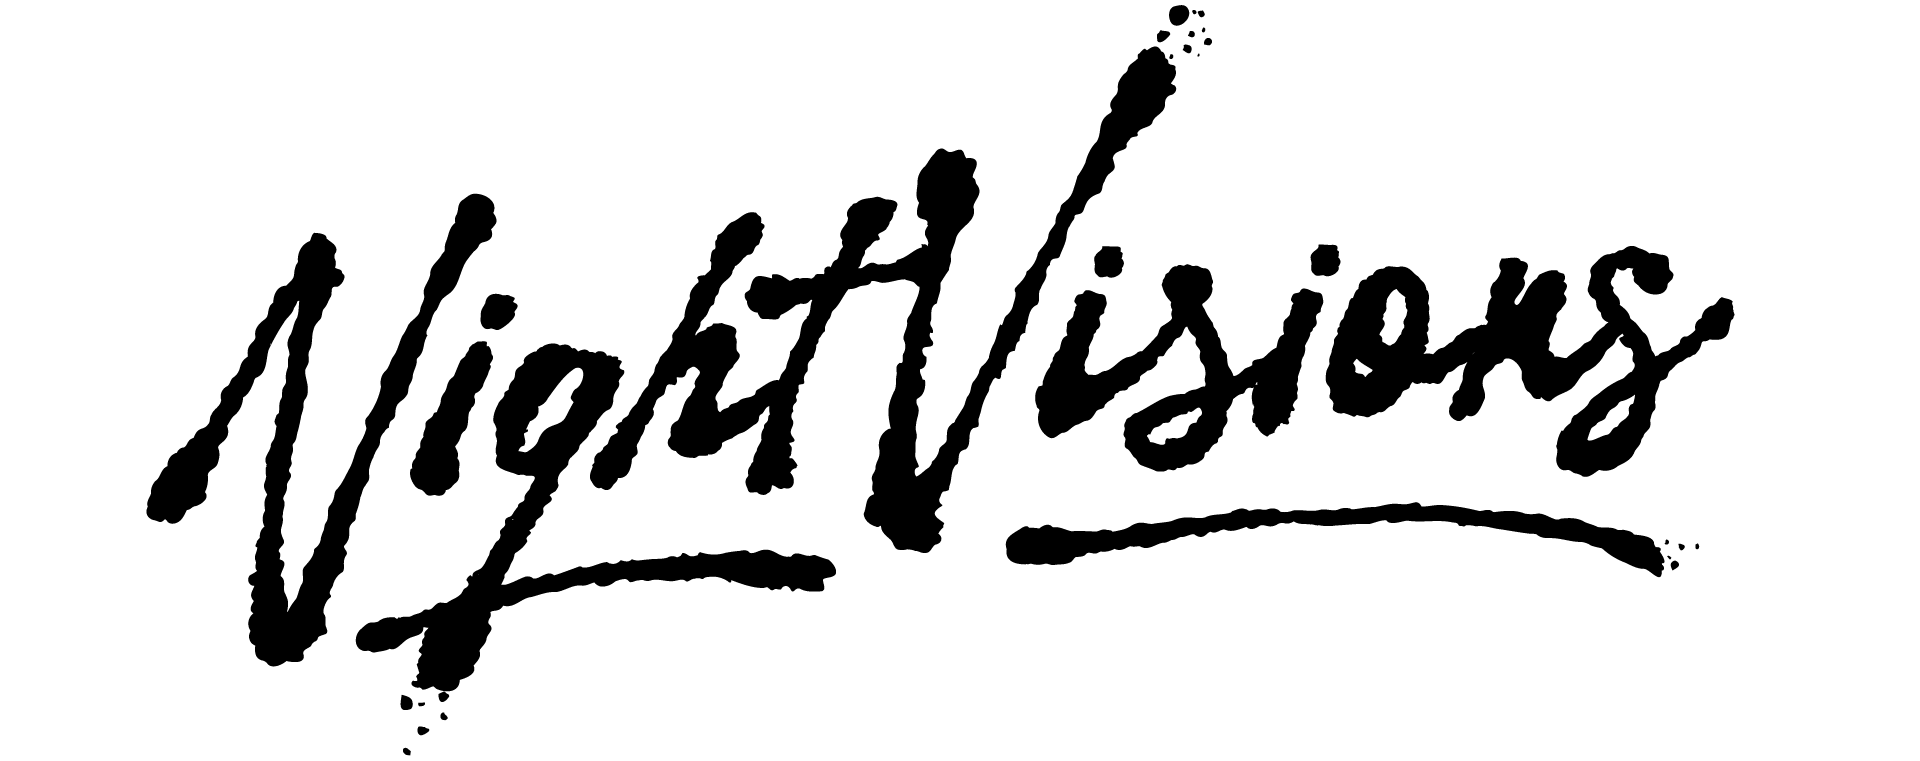 Night Visions: An Unsettling Hand-Drawn Brush Script Font by Wingsart Studio